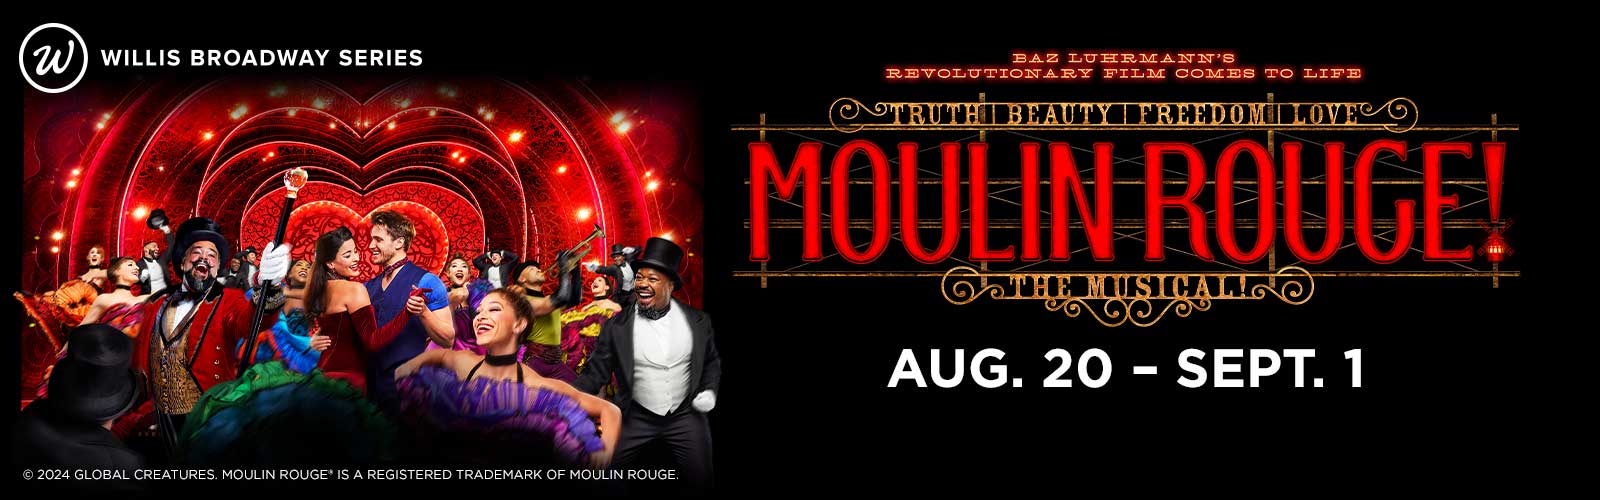 MOULIN ROUGE!